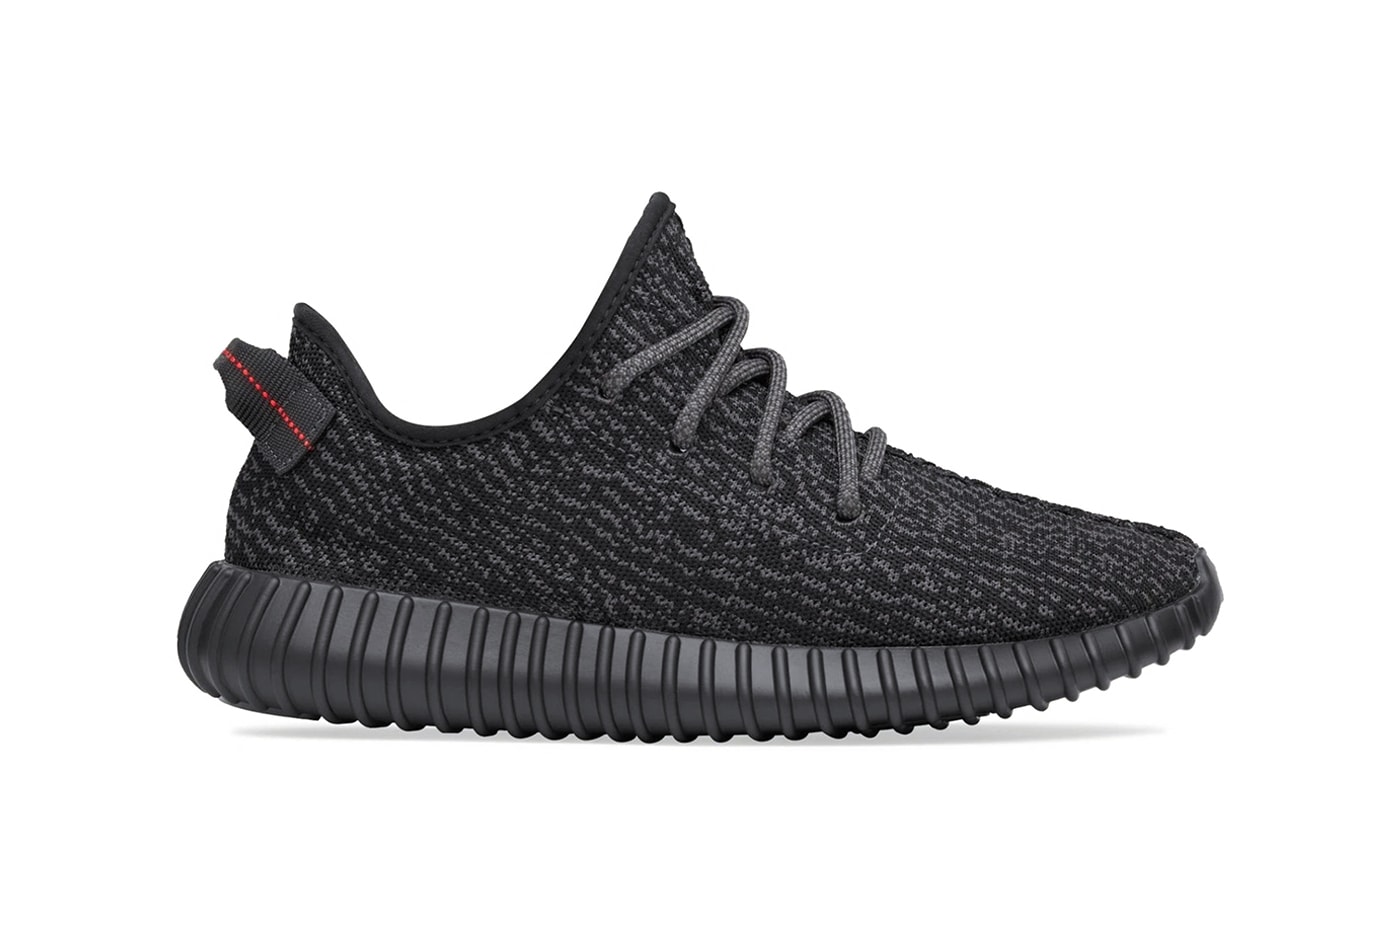 Culo maduro Colector adidas YEEZY BOOST 350 "Pirate Black" Receives a Release Date | Hypebeast